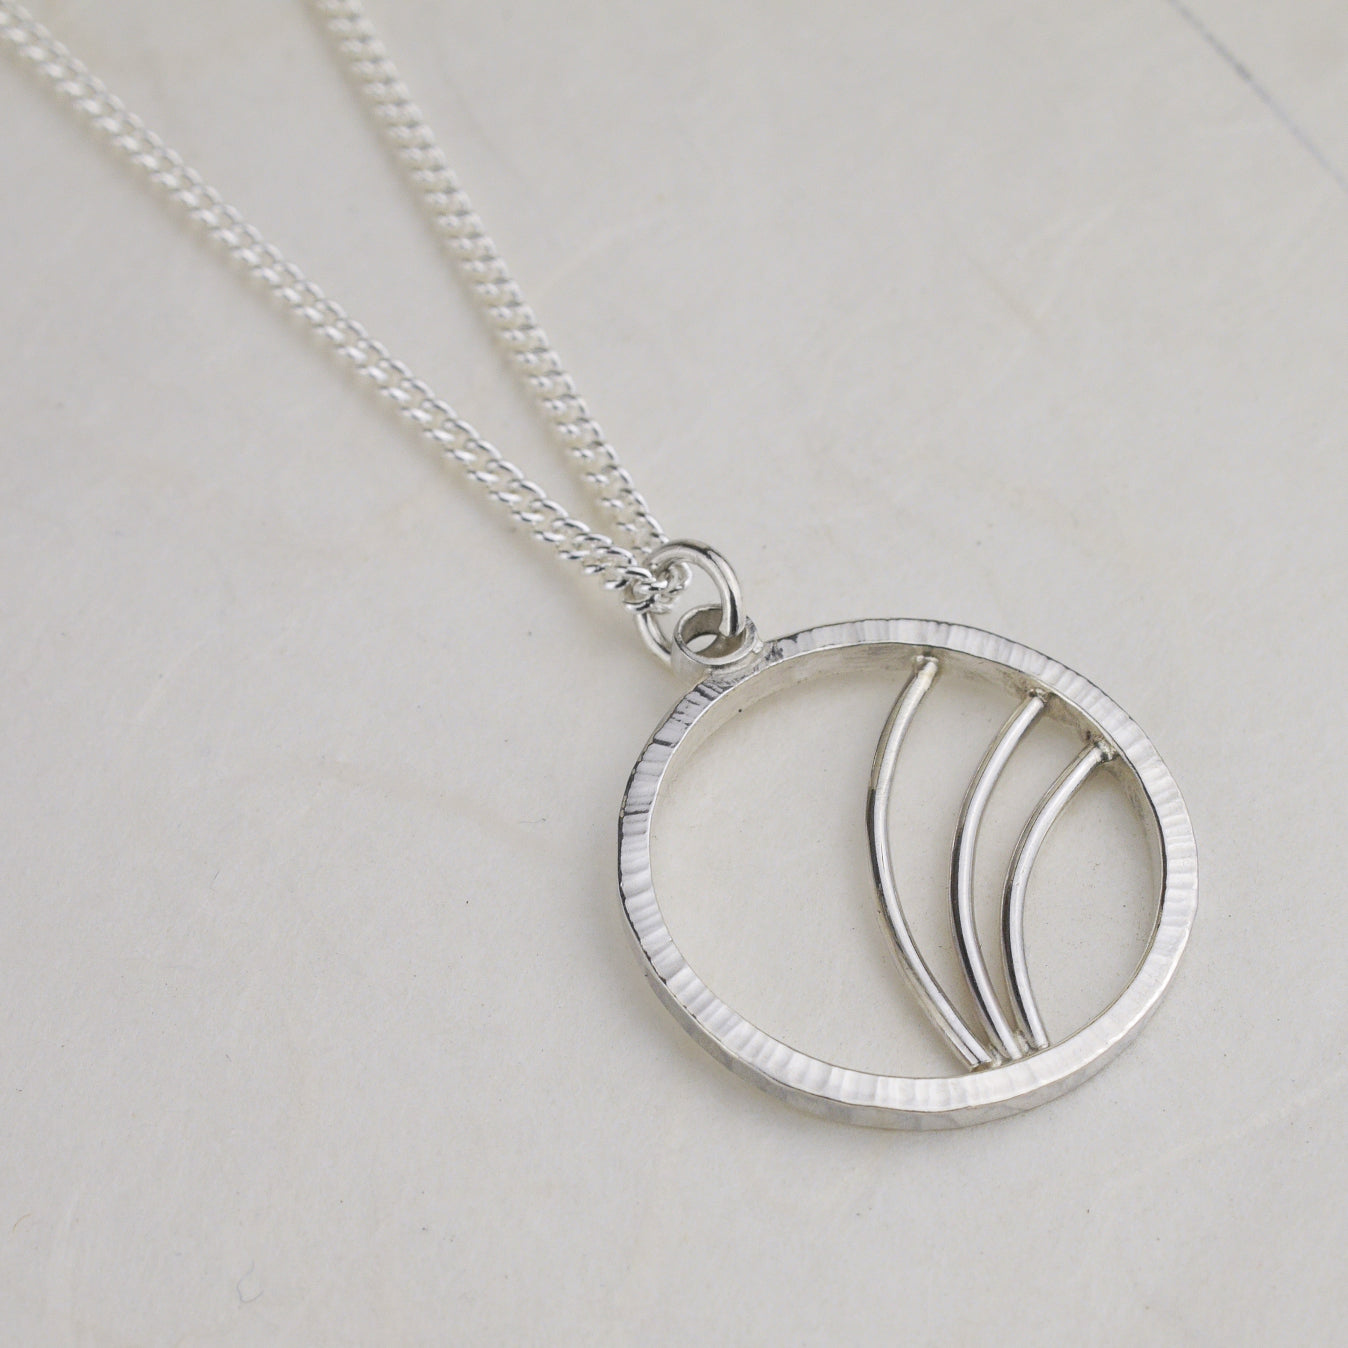 Hammered Silver Circle Necklace with Arc Details